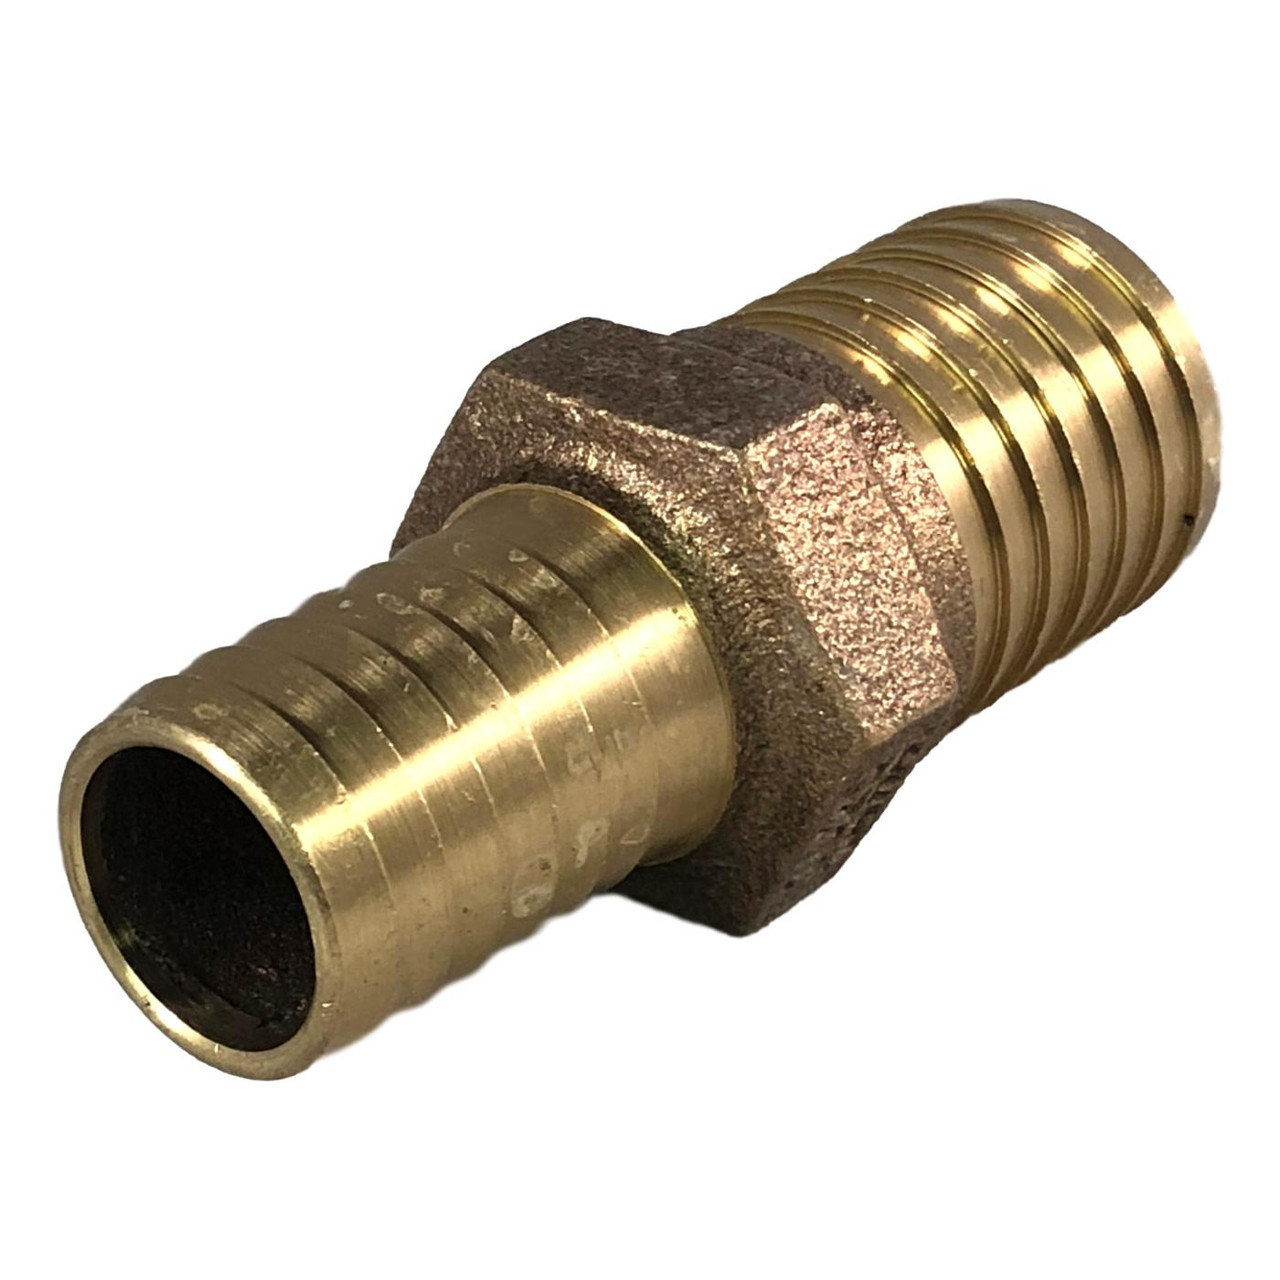 Brass Barb Insert Coupling - 1 x 1-1/4 with Hex